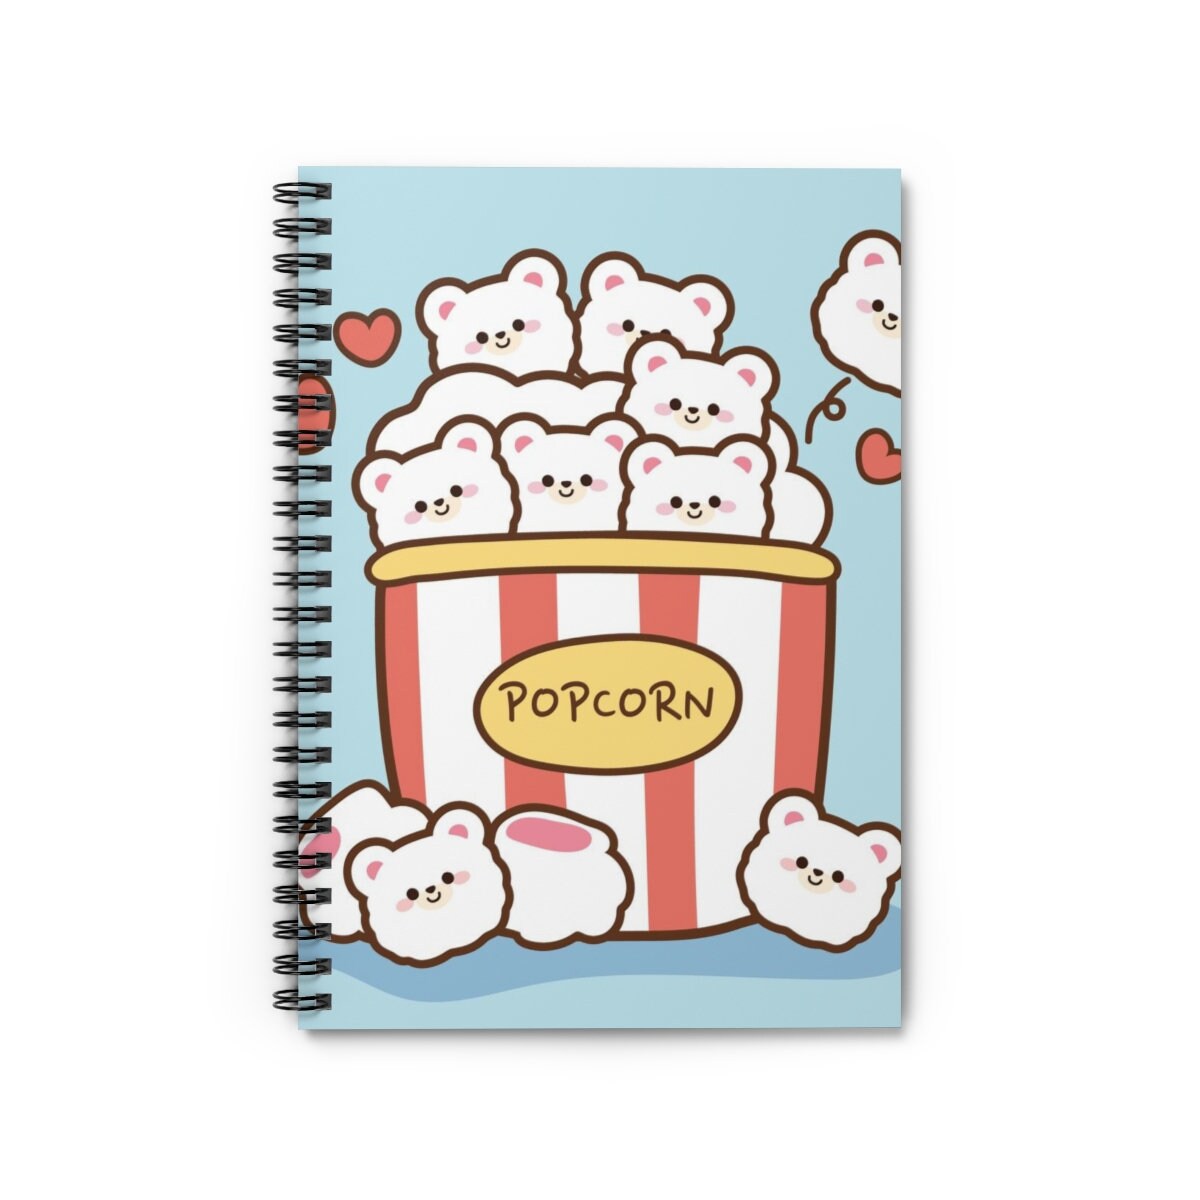 Cheer.US Journal Notebook Cute Kawaii Notebook Cartoon Animal Journal Diary  Planner Notepad for Kids Gift - Lined Notebook, Diary, Track, Log & Journal  - Gift Idea for Kids 